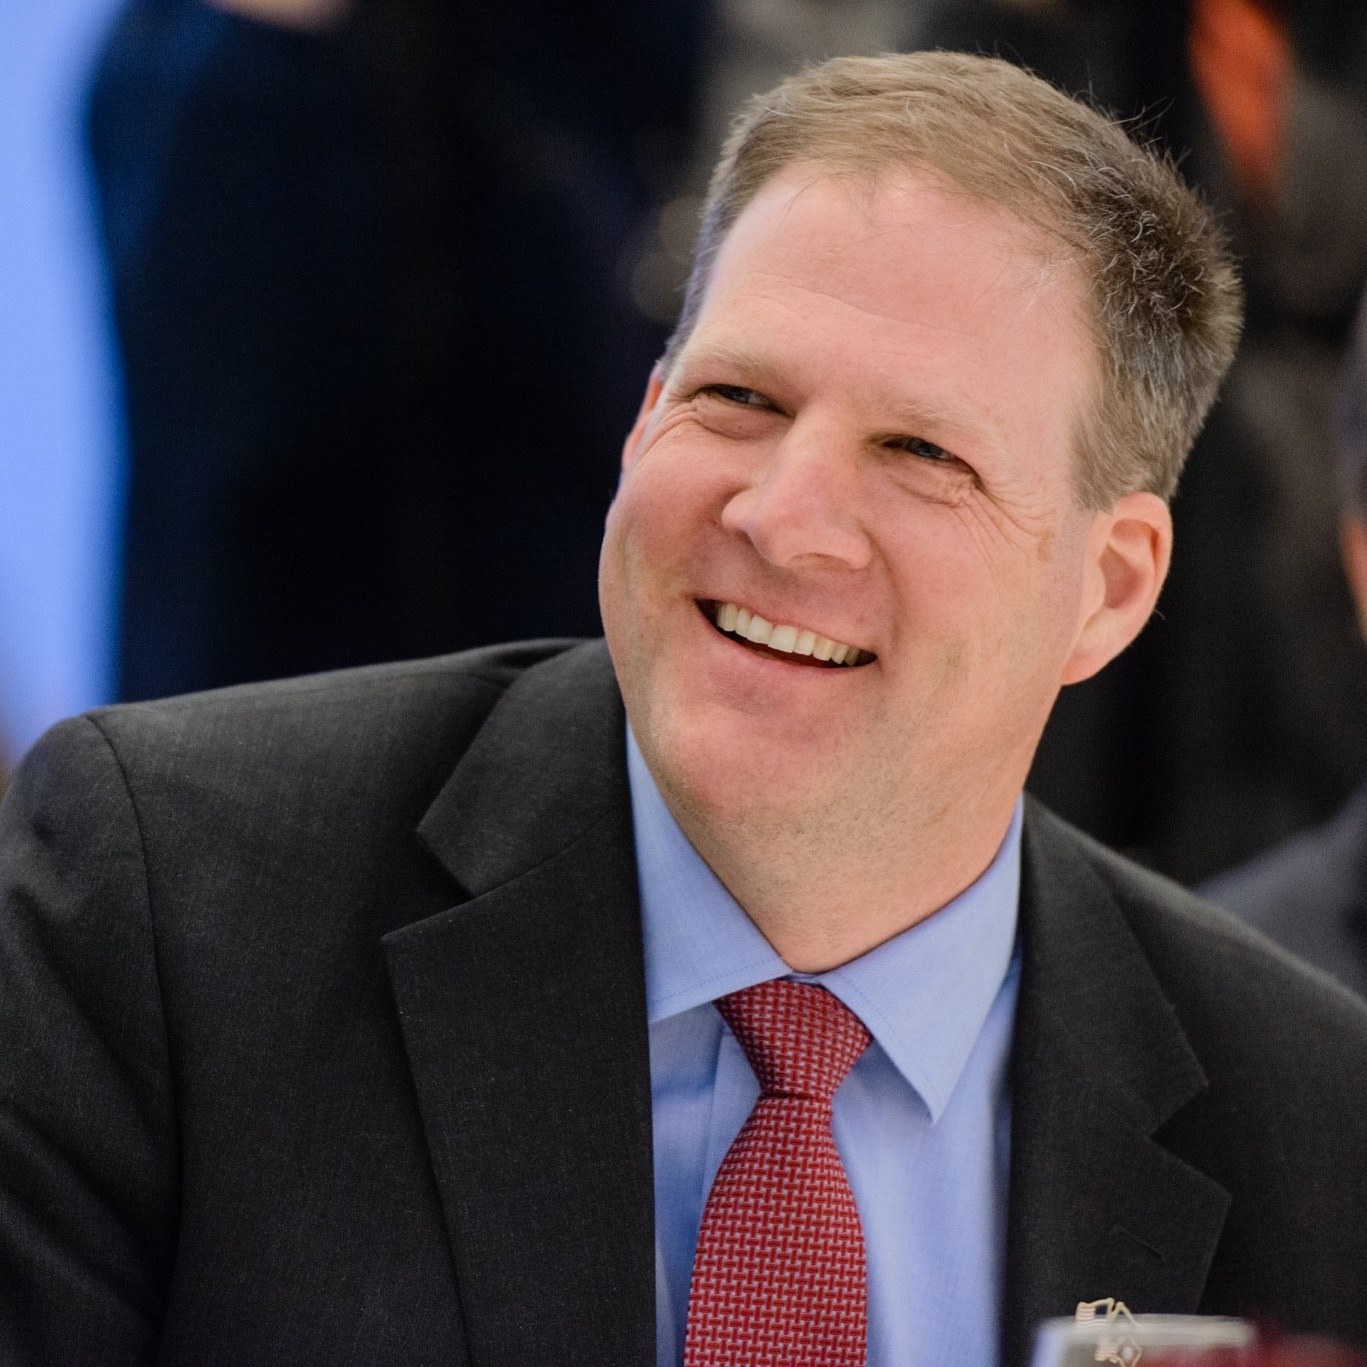 Gov. Sununu To Officially Be Sworn In Today To Begin Fourth Term In Office